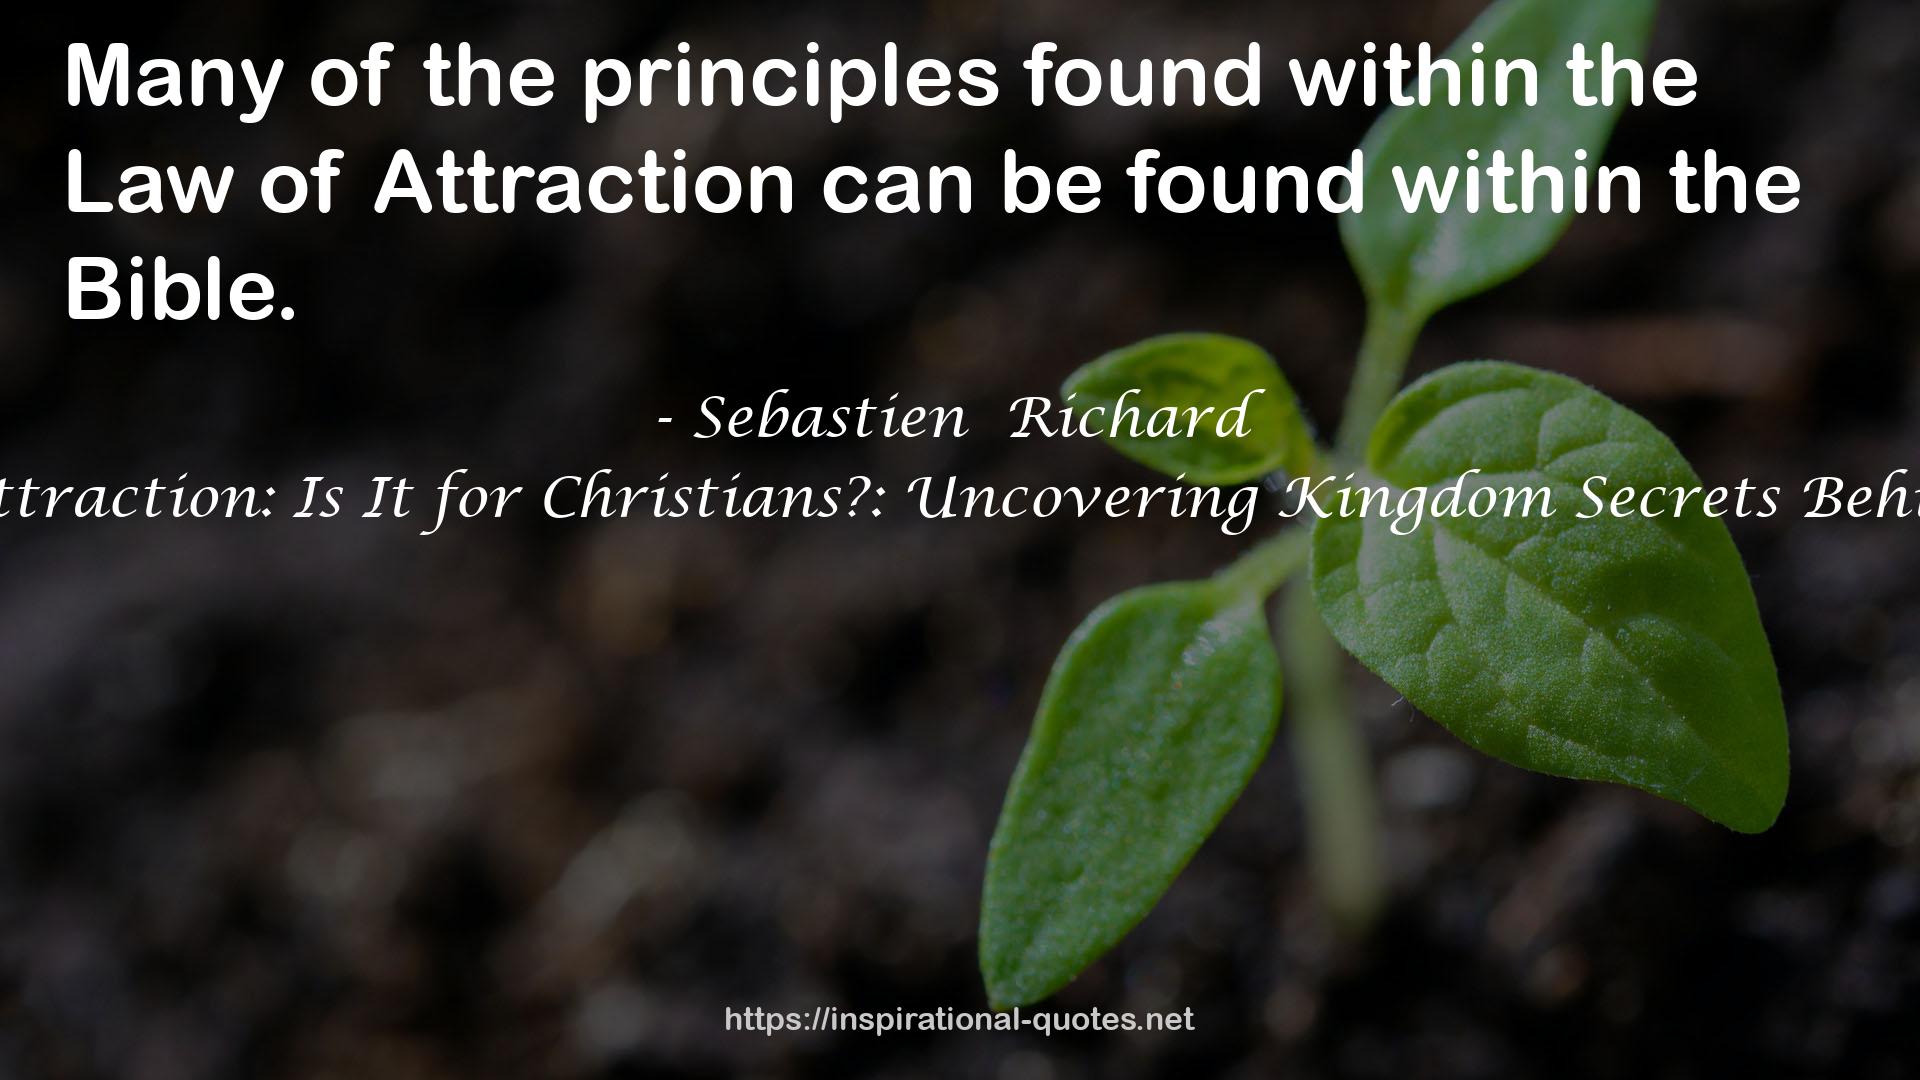 The Law of Attraction: Is It for Christians?: Uncovering Kingdom Secrets Behind The Secret QUOTES